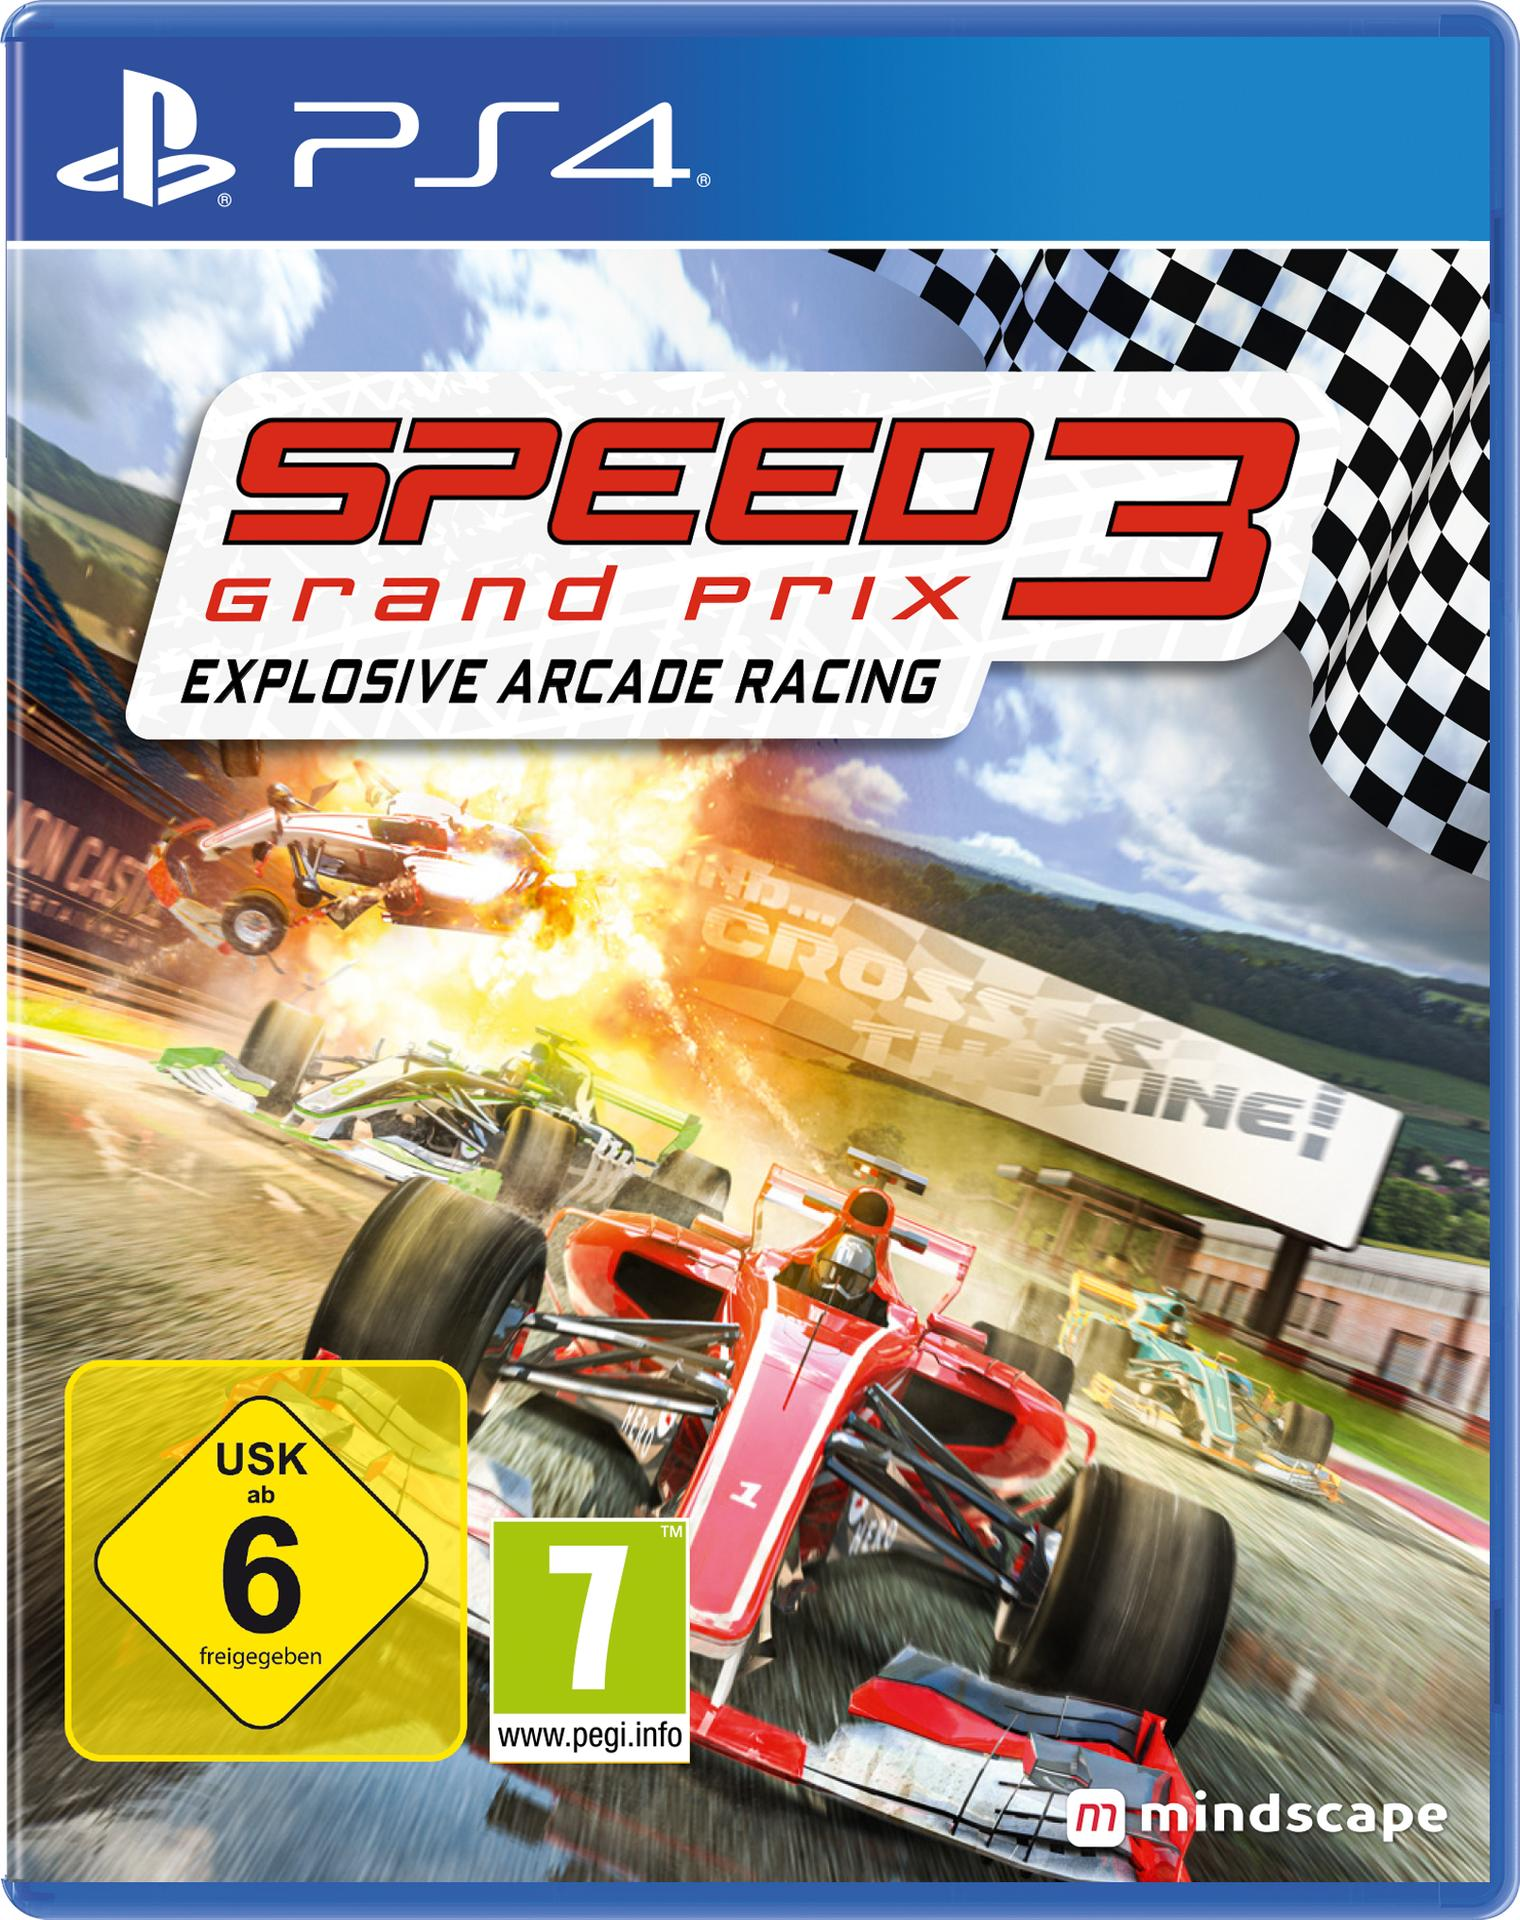 PS4 SPEED 3 [PlayStation - PRIX - GRAND 4